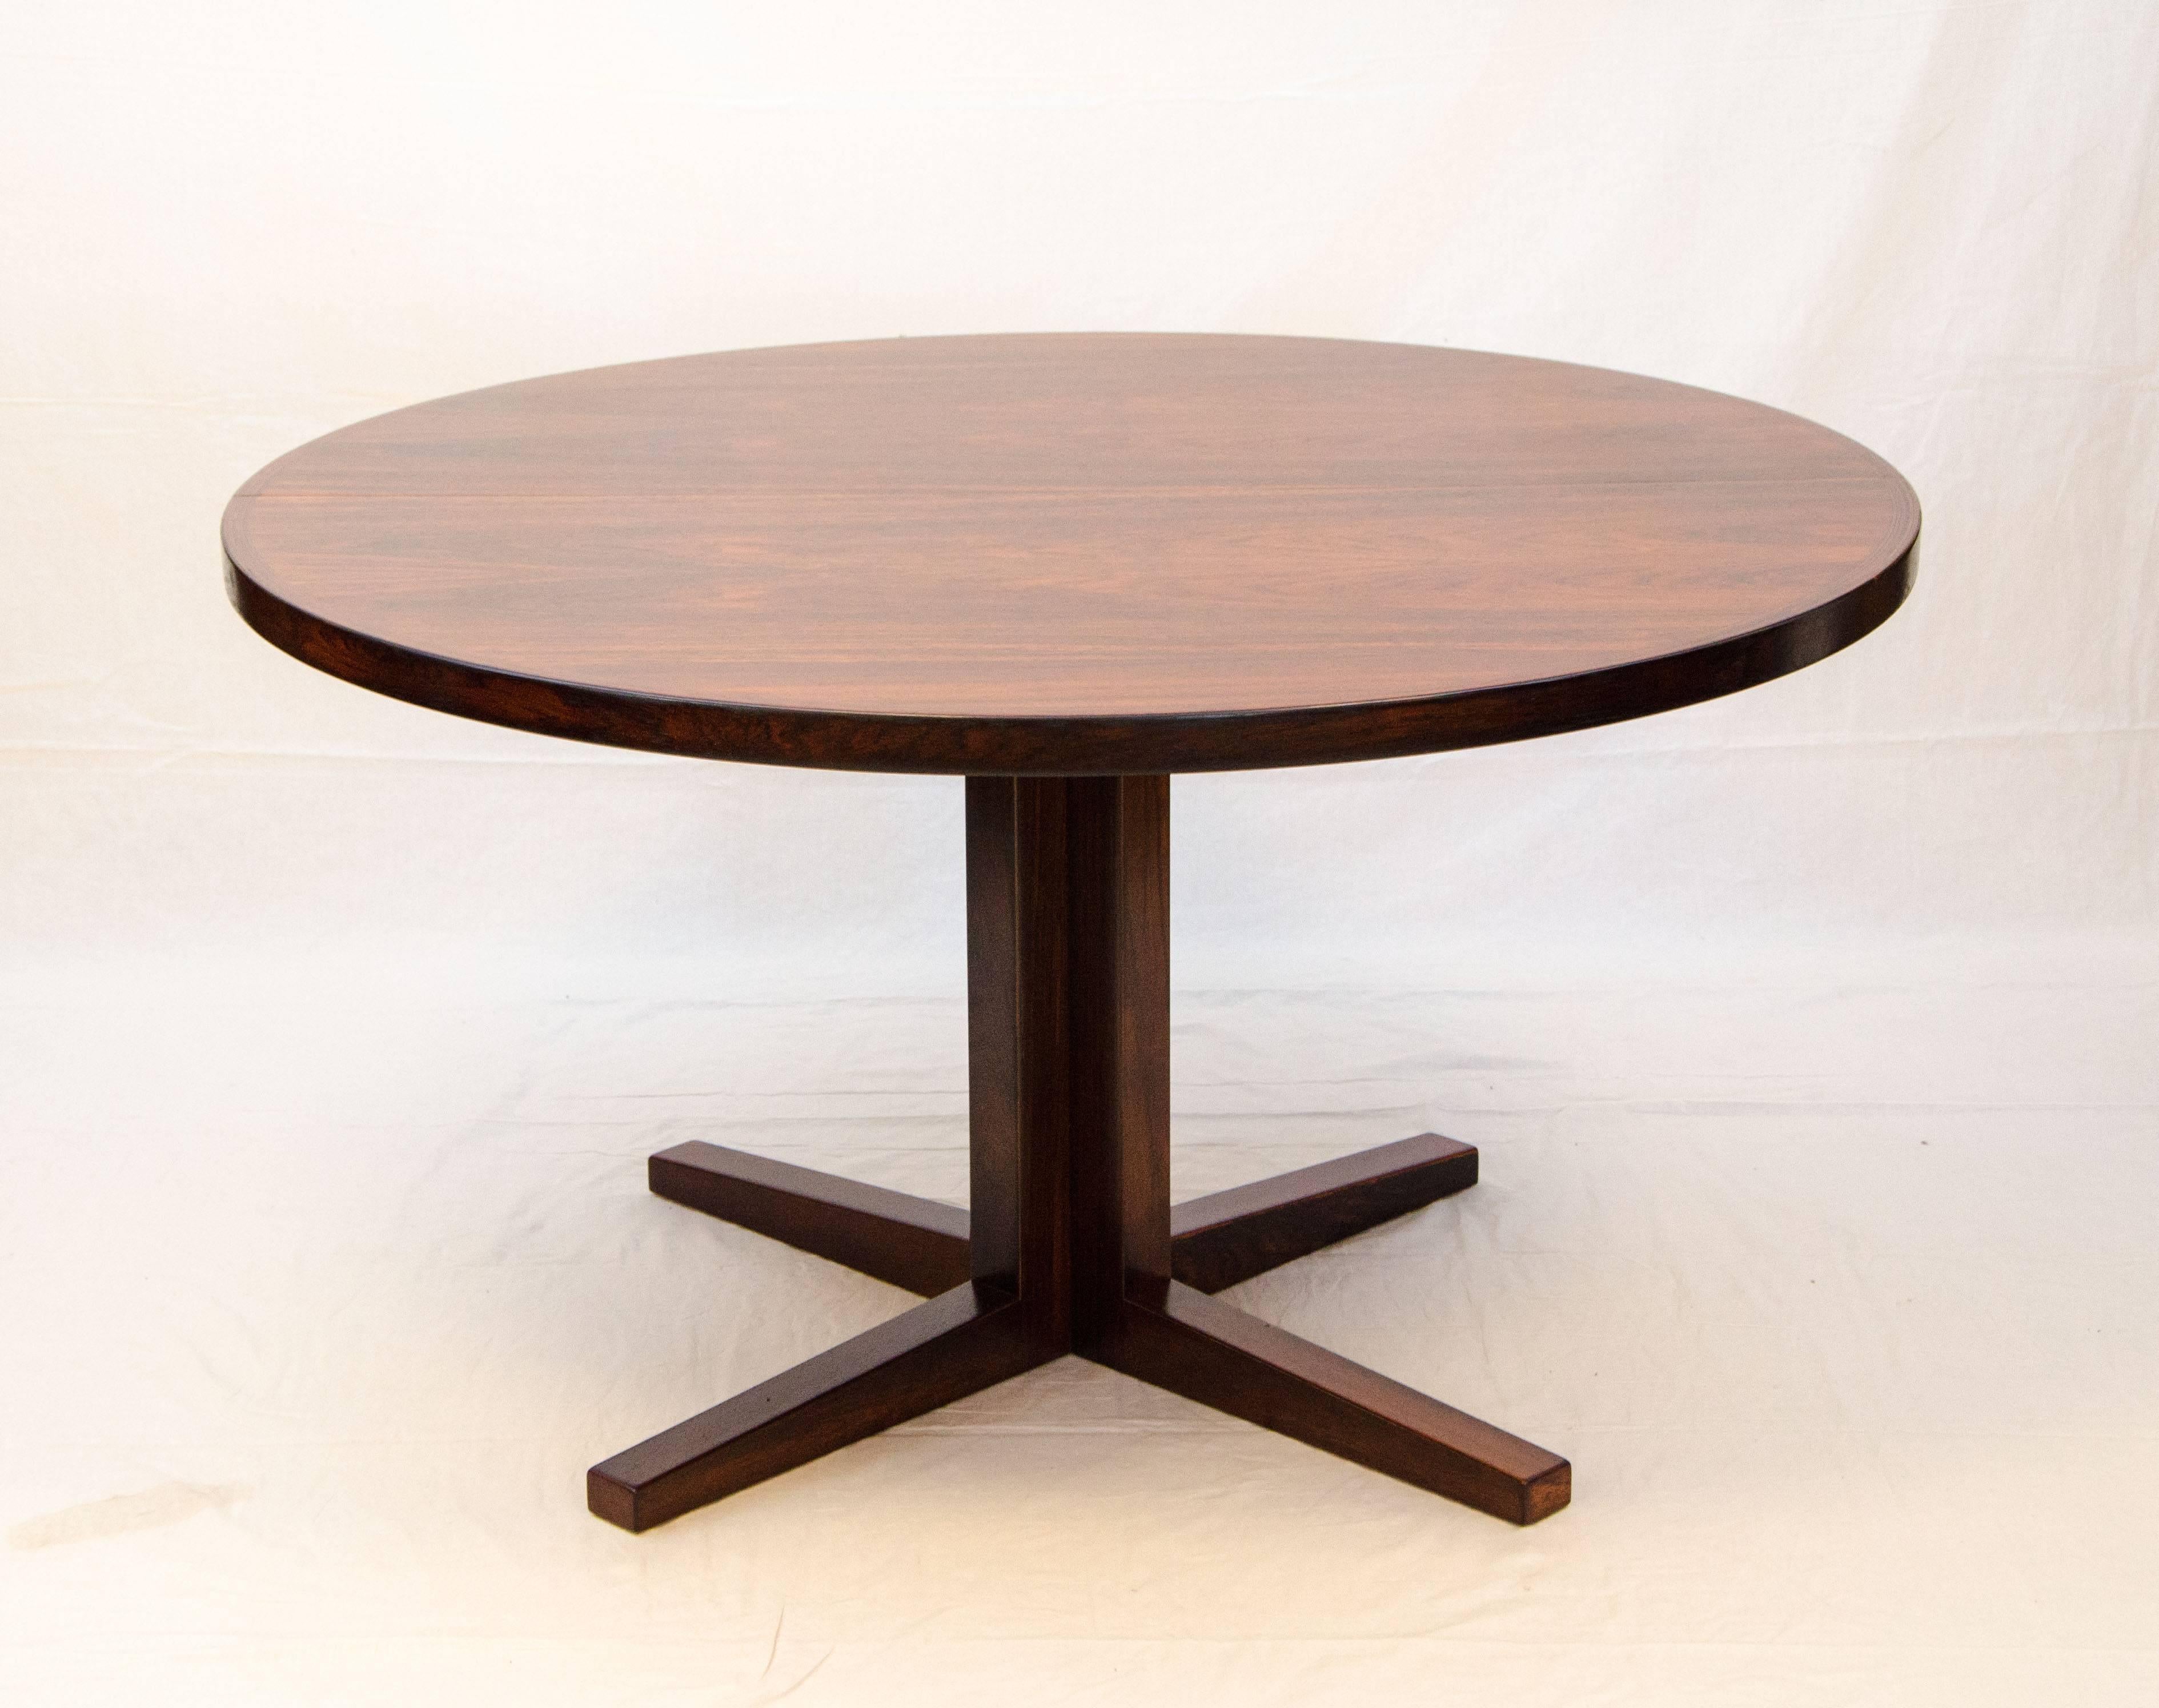 Very nice Danish rosewood circular table with one 19 1/2